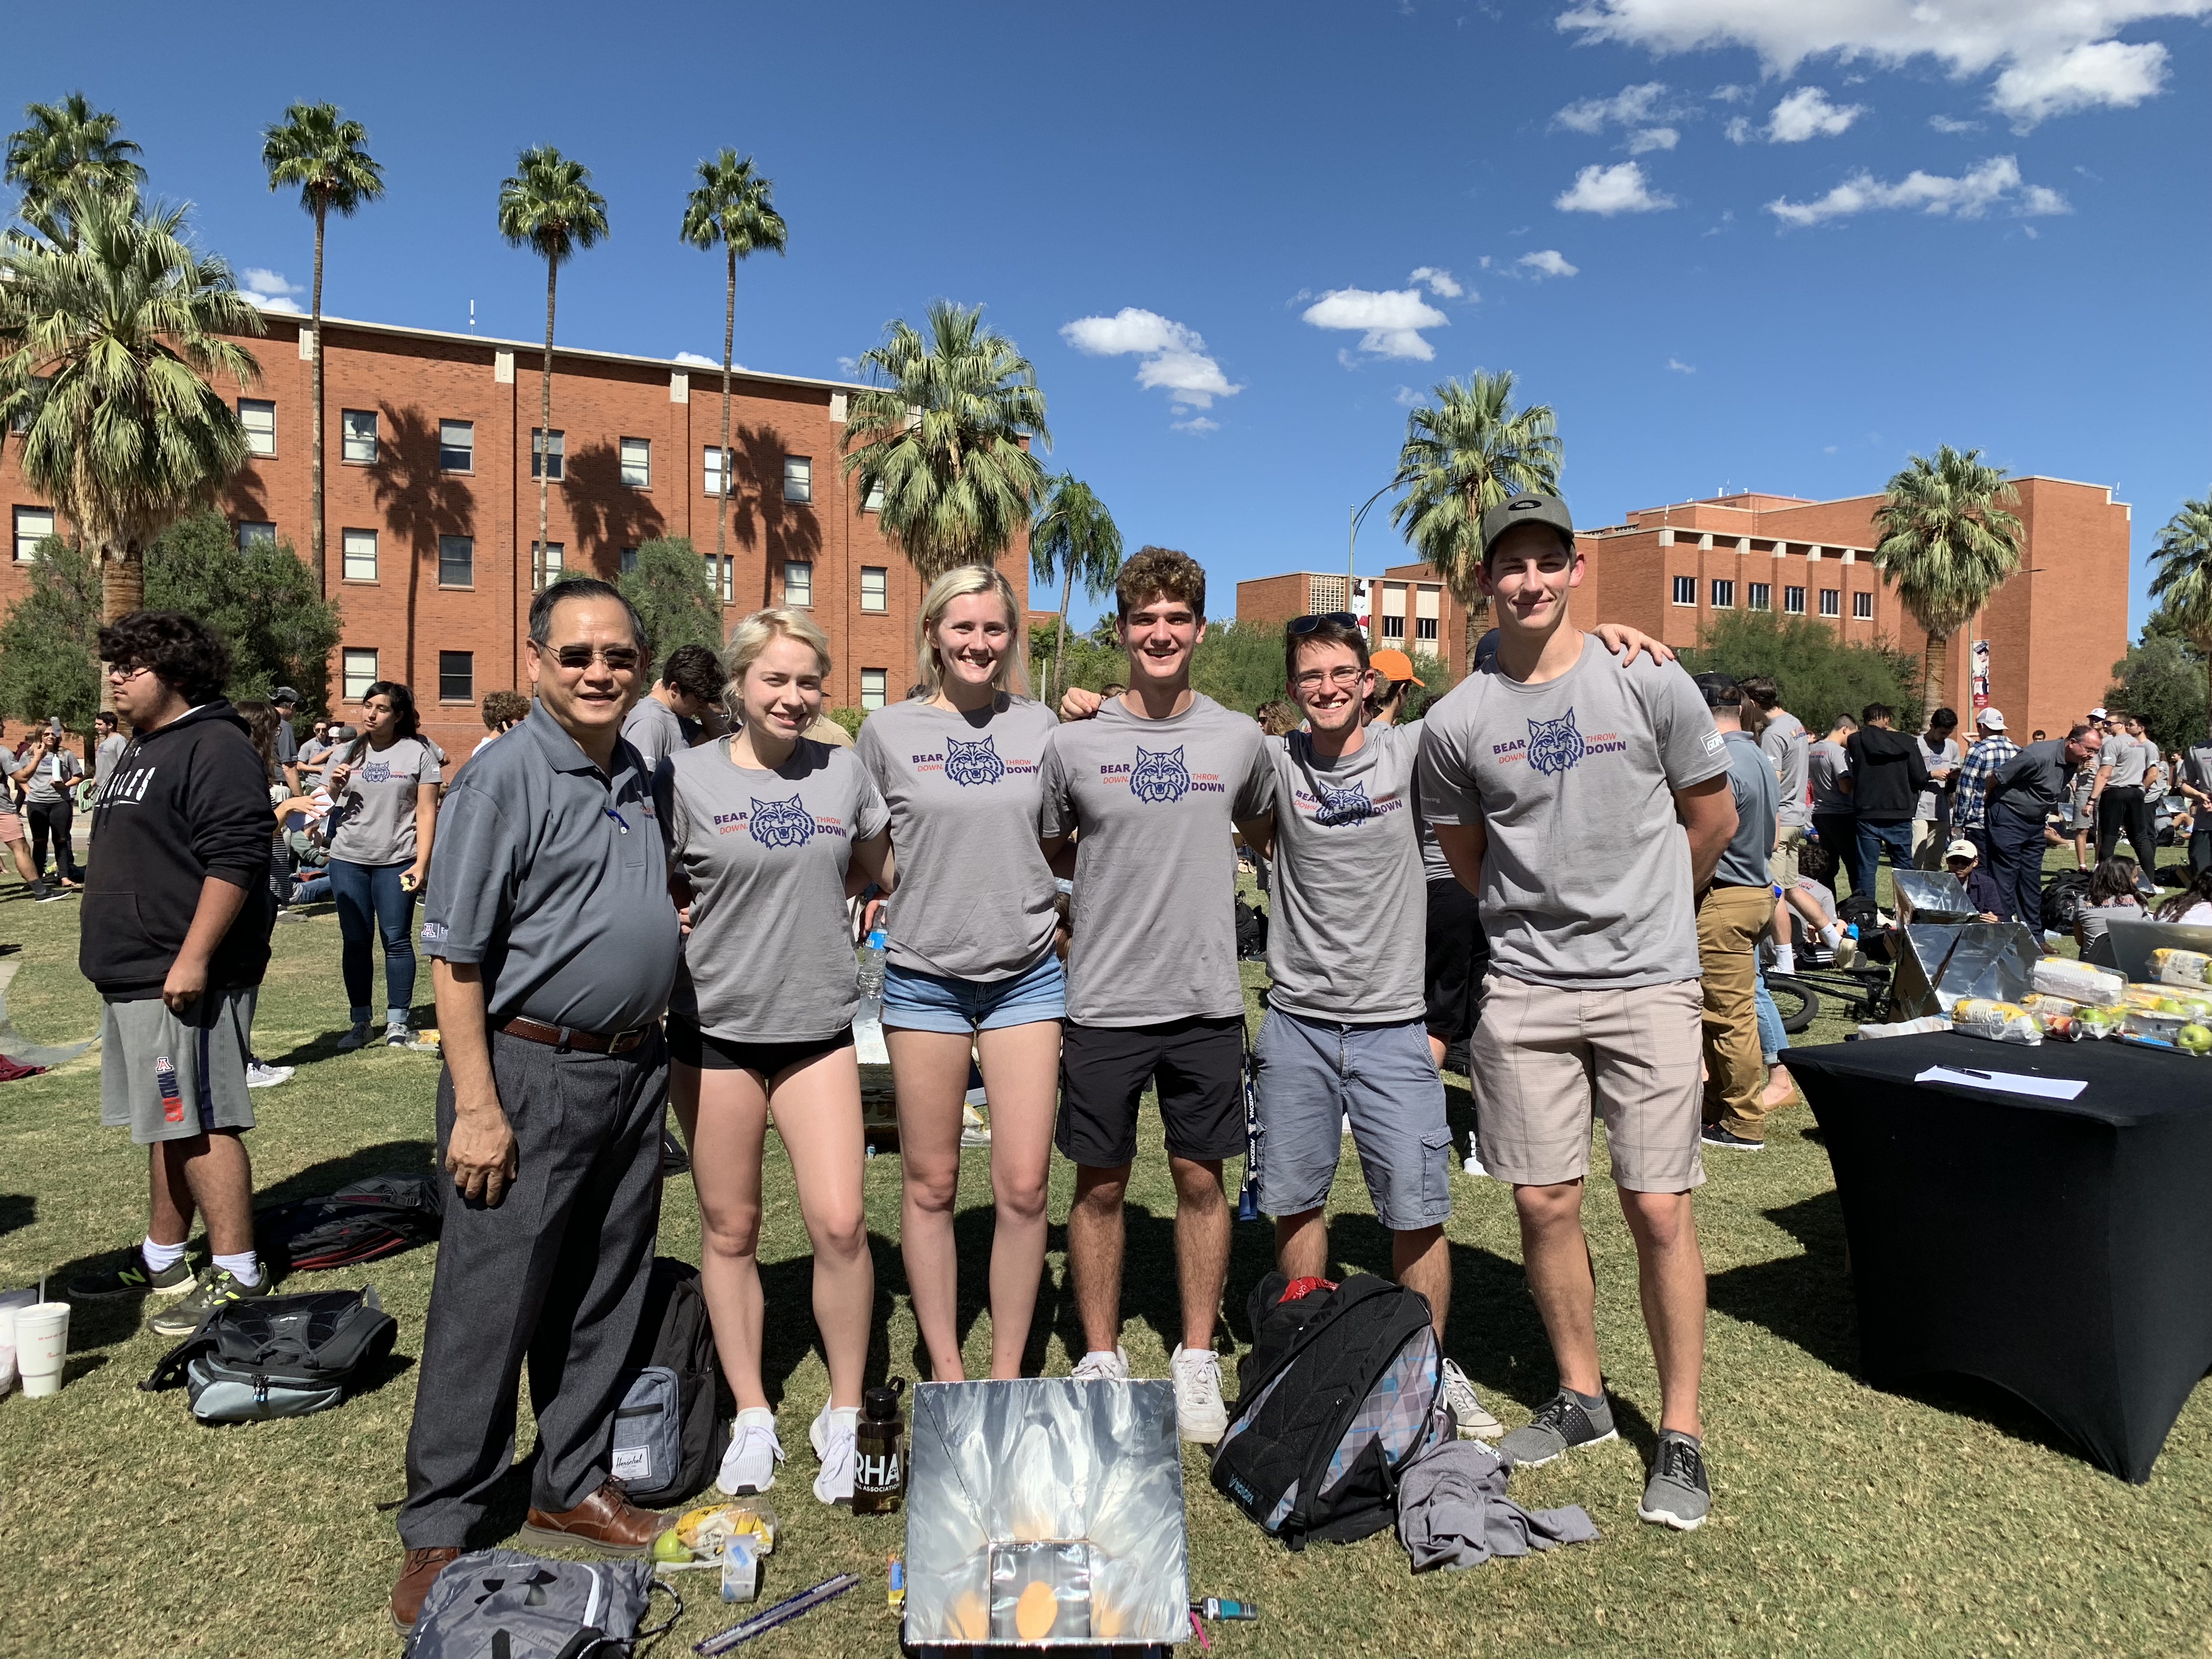 Solar Oven Throw Down event 2018